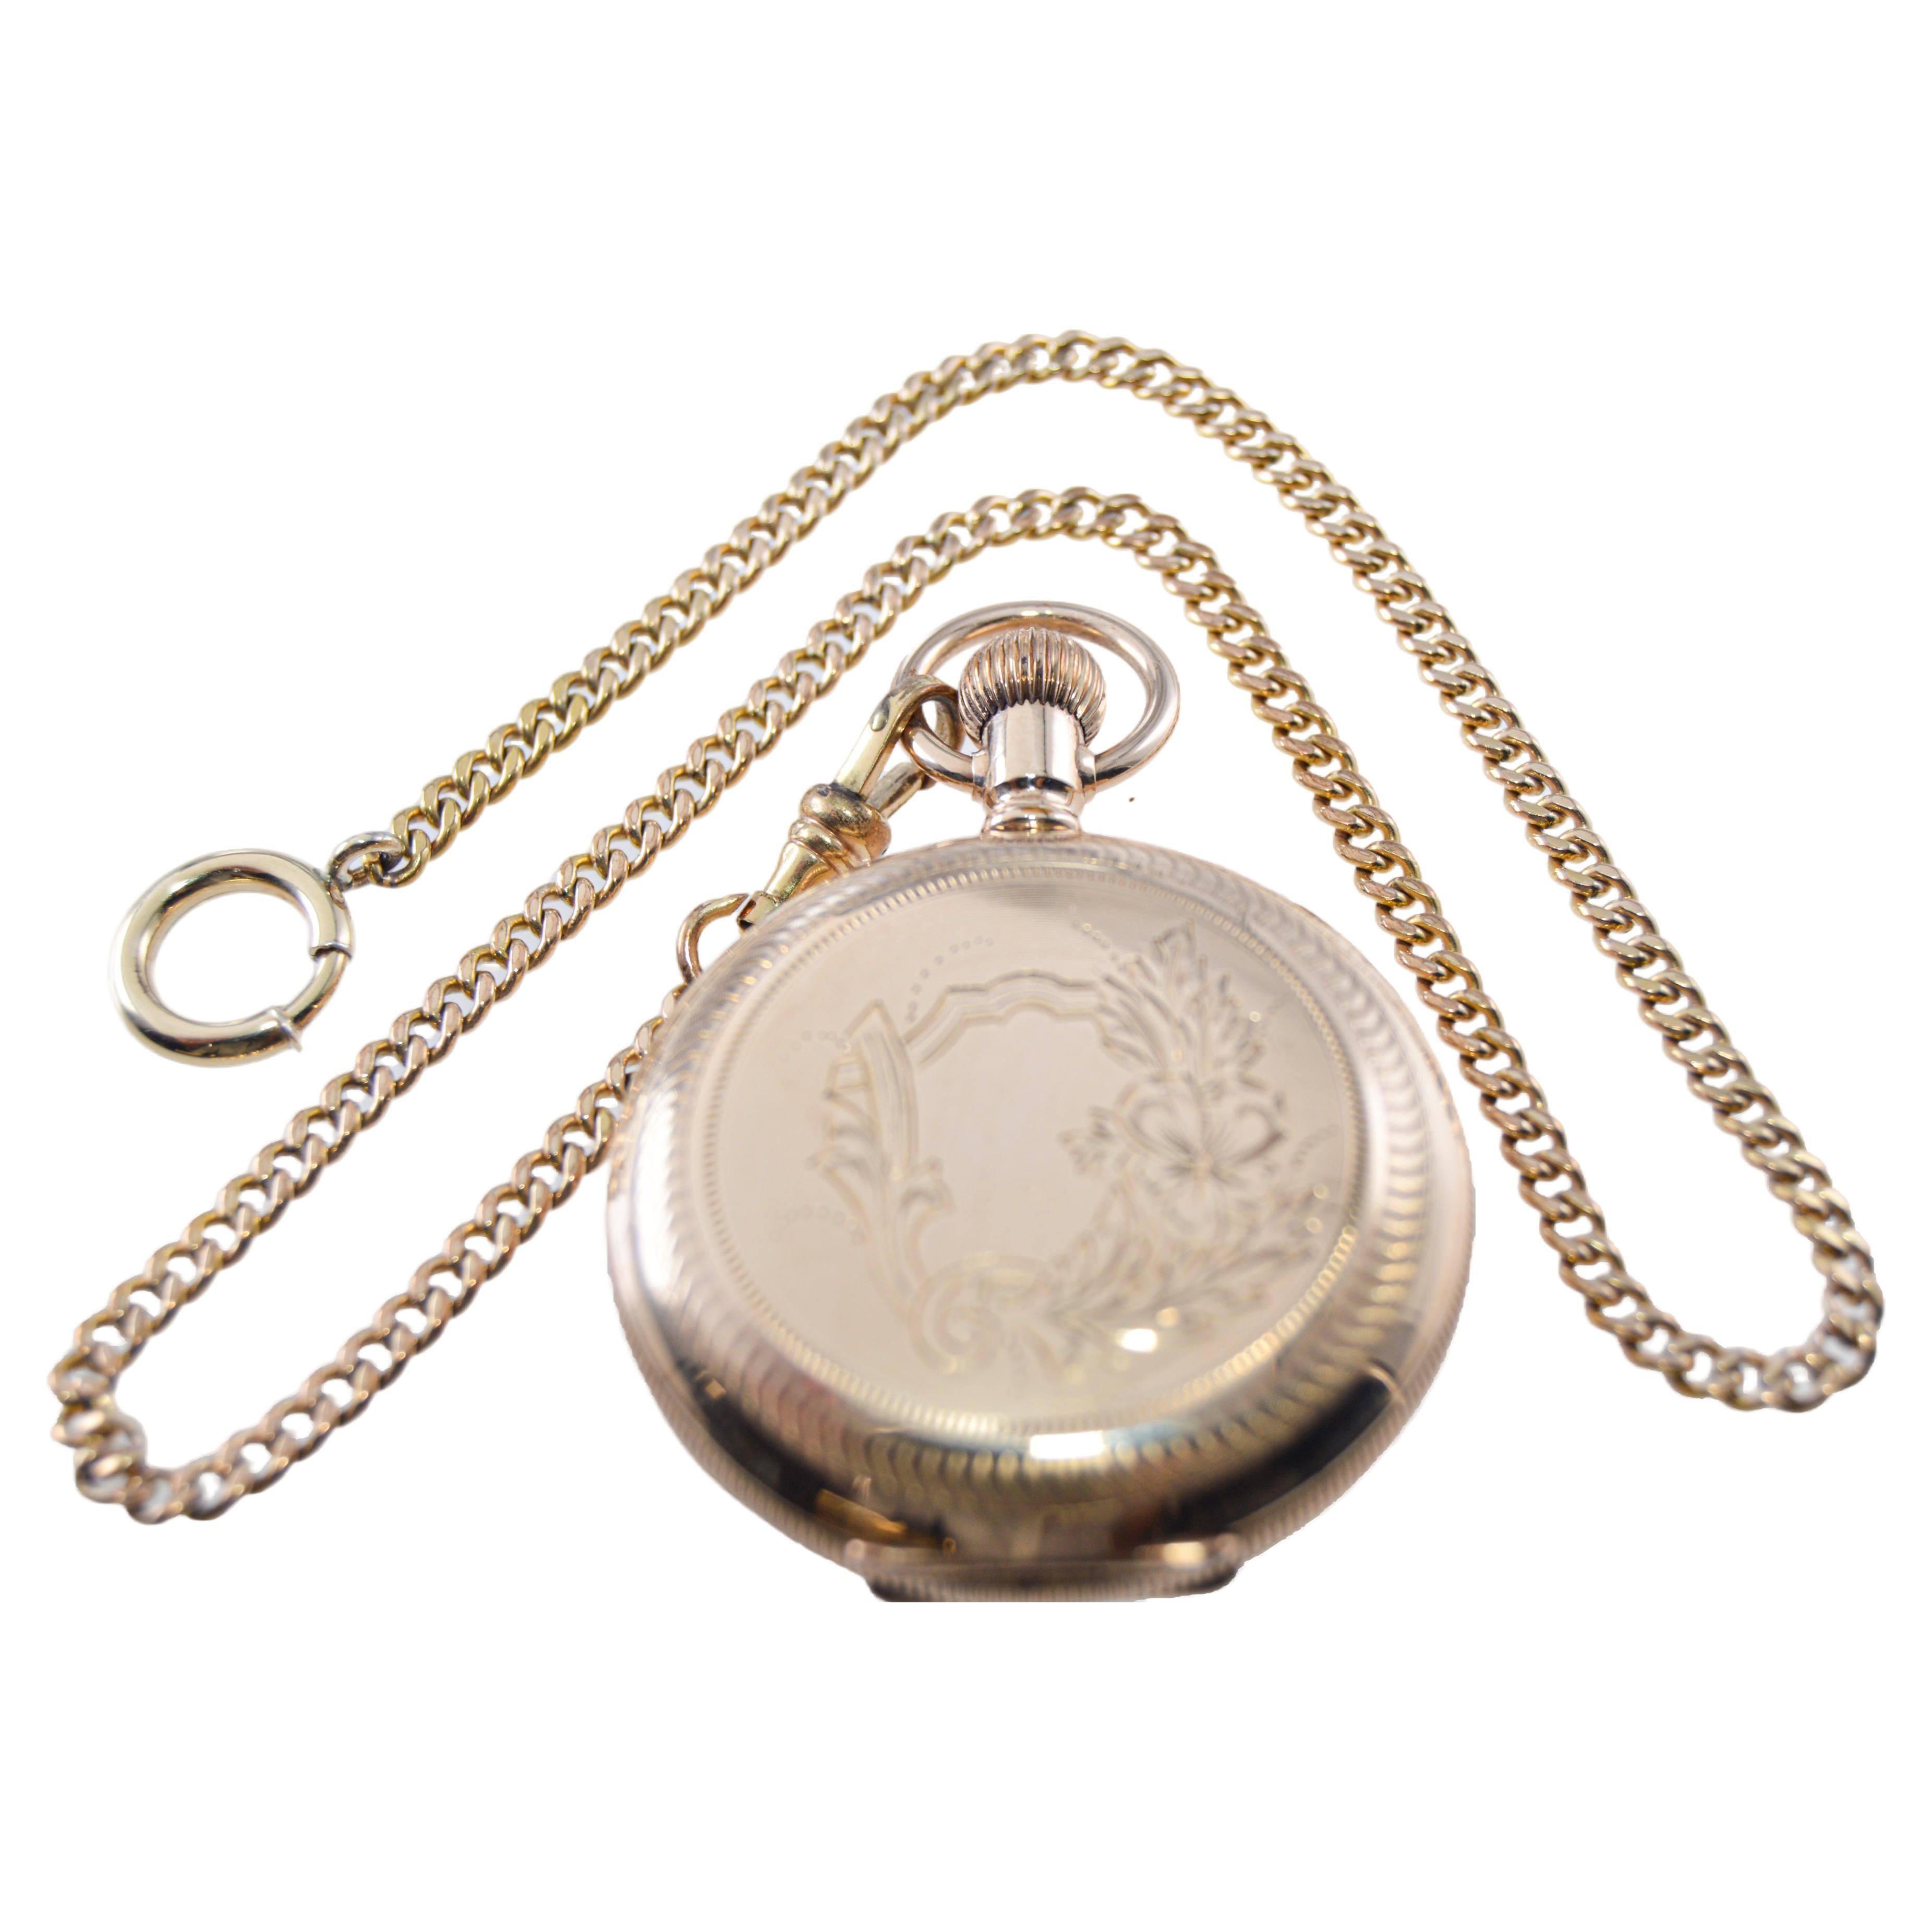 FACTORY / HOUSE: Waltham Watch Company
STYLE / REFERENCE: Hunters Case Pendant Style / Hand Engraved 
METAL / MATERIAL: Yellow Gold Filled
CIRCA / YEAR: 1893
DIMENSIONS / SIZE: Diameter 42mm 
MOVEMENT / CALIBER: Manual Winding / 6 Size
DIAL / HANDS: